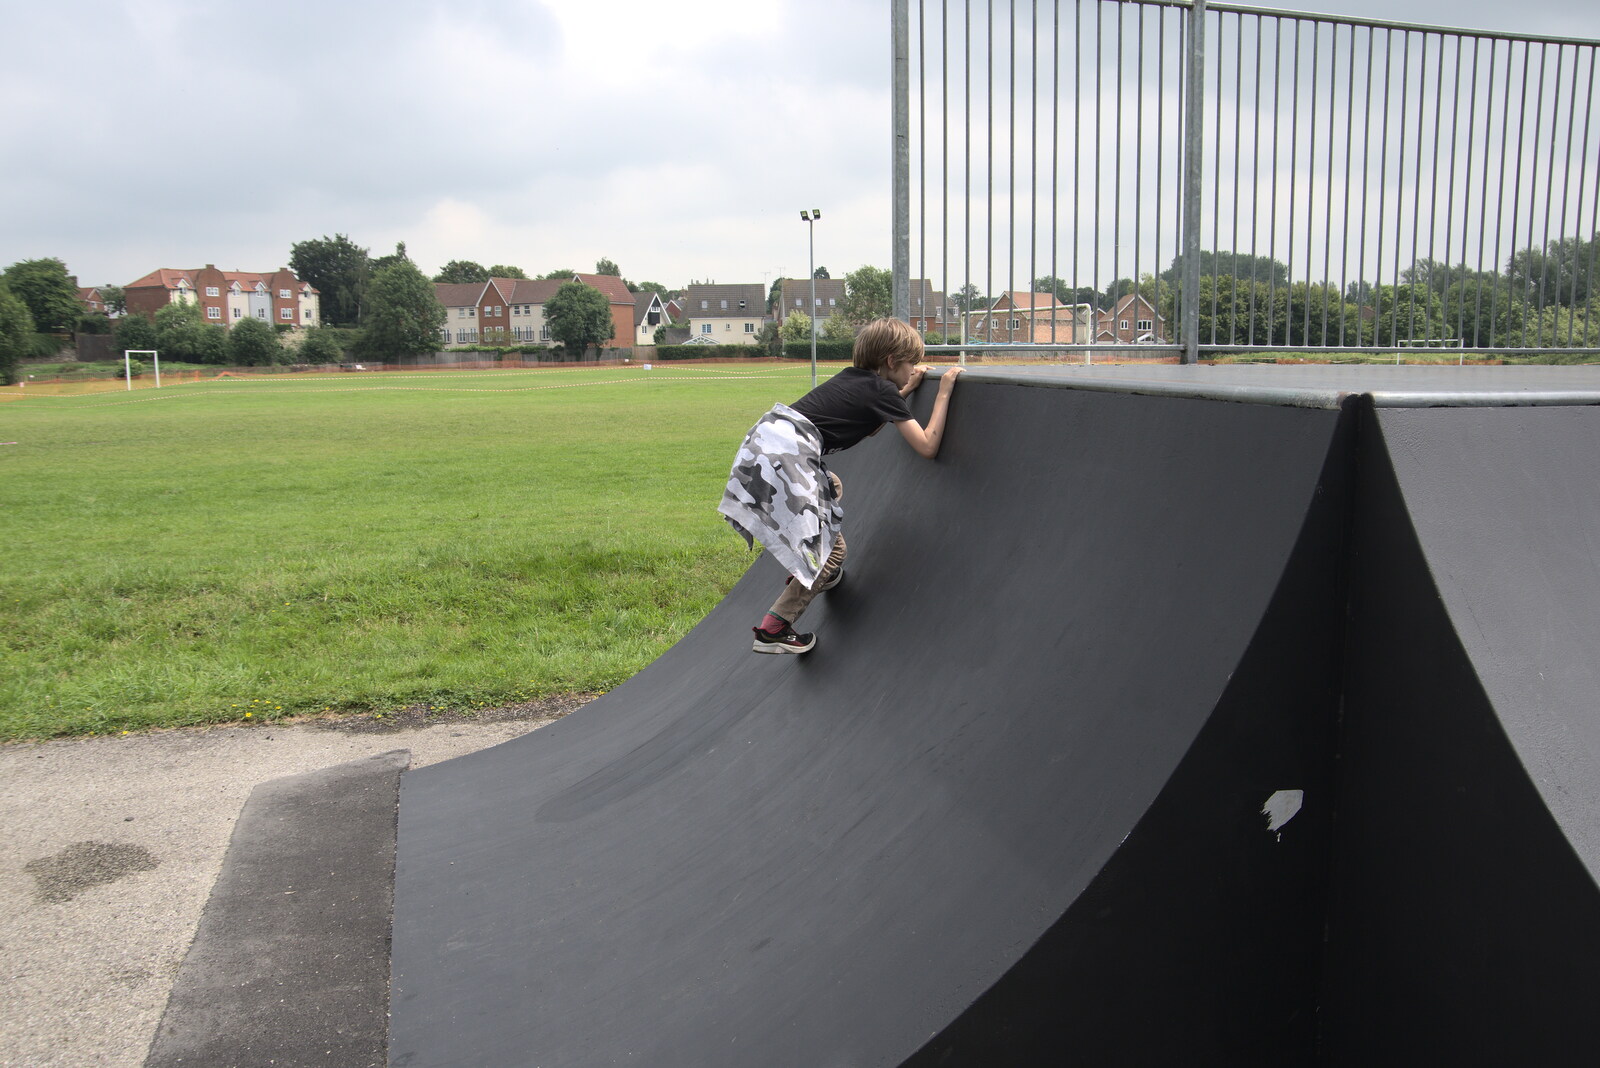 Harry climbs up the ramp the hard way from New Kittens, and The Skate Park, Town Moors, Eye, Suffolk - 3rd July 2021